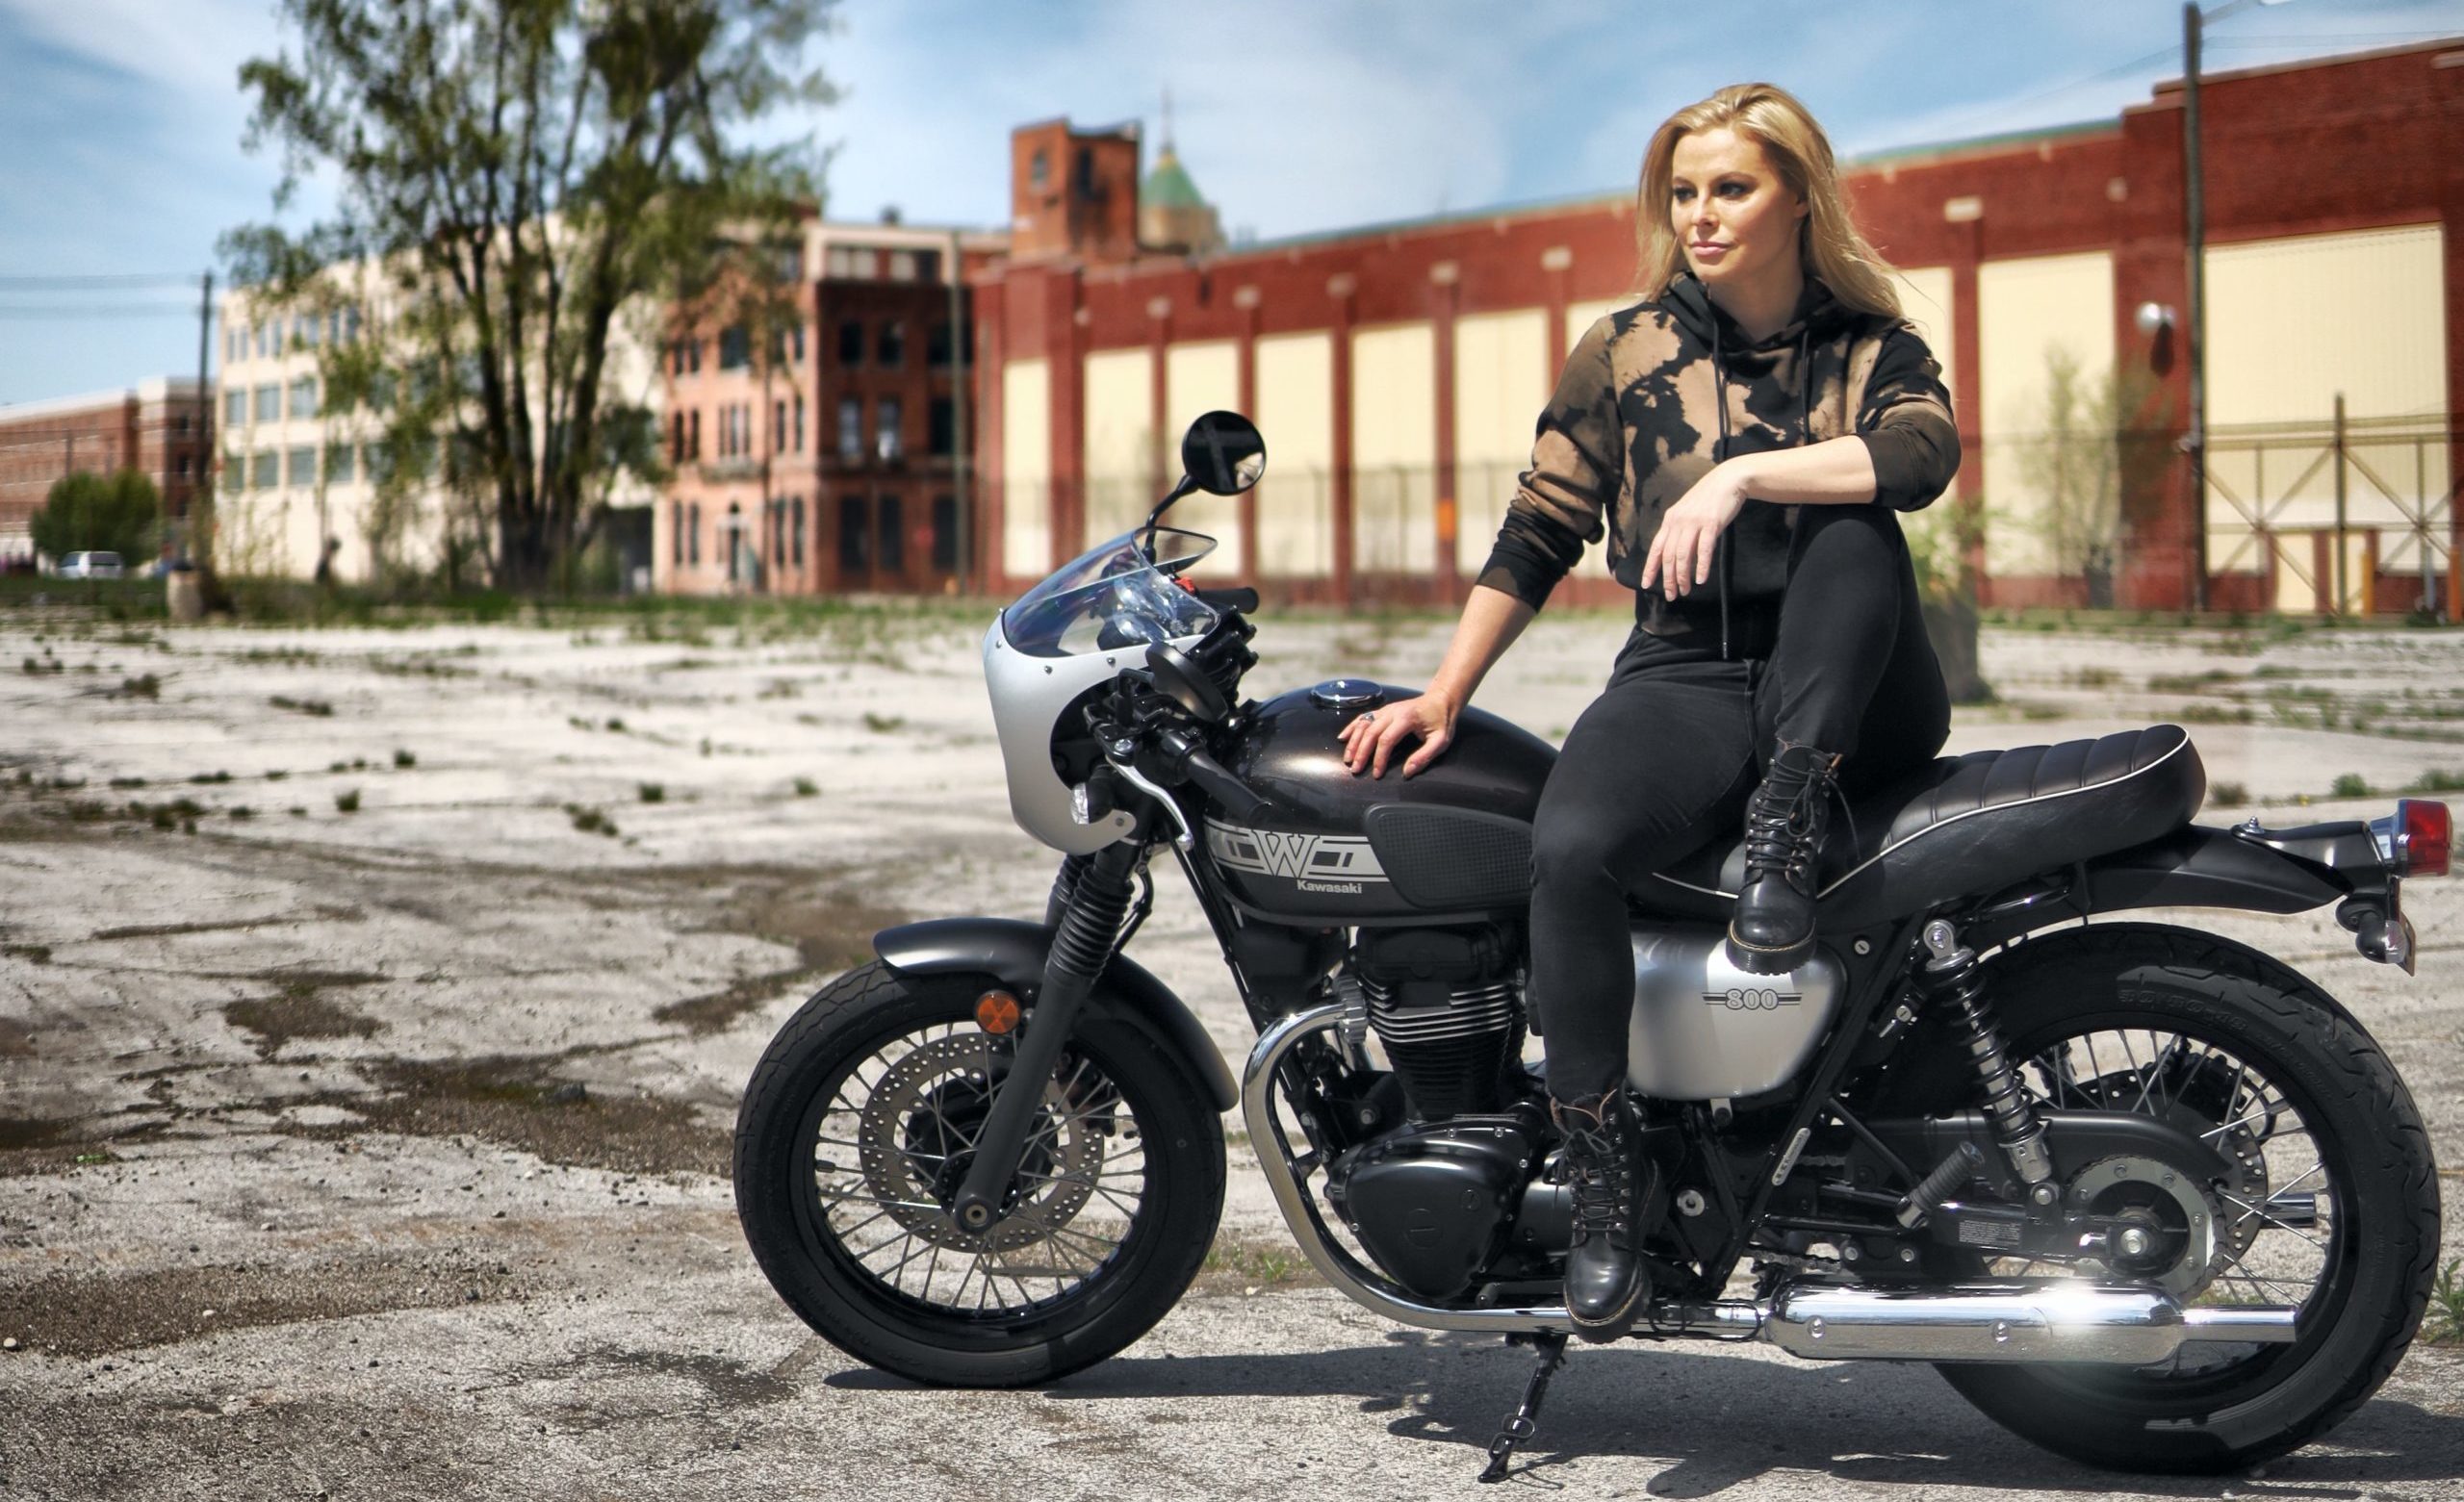 Cristy Lee | TV Personality, Business Woman, Rider - GOSS